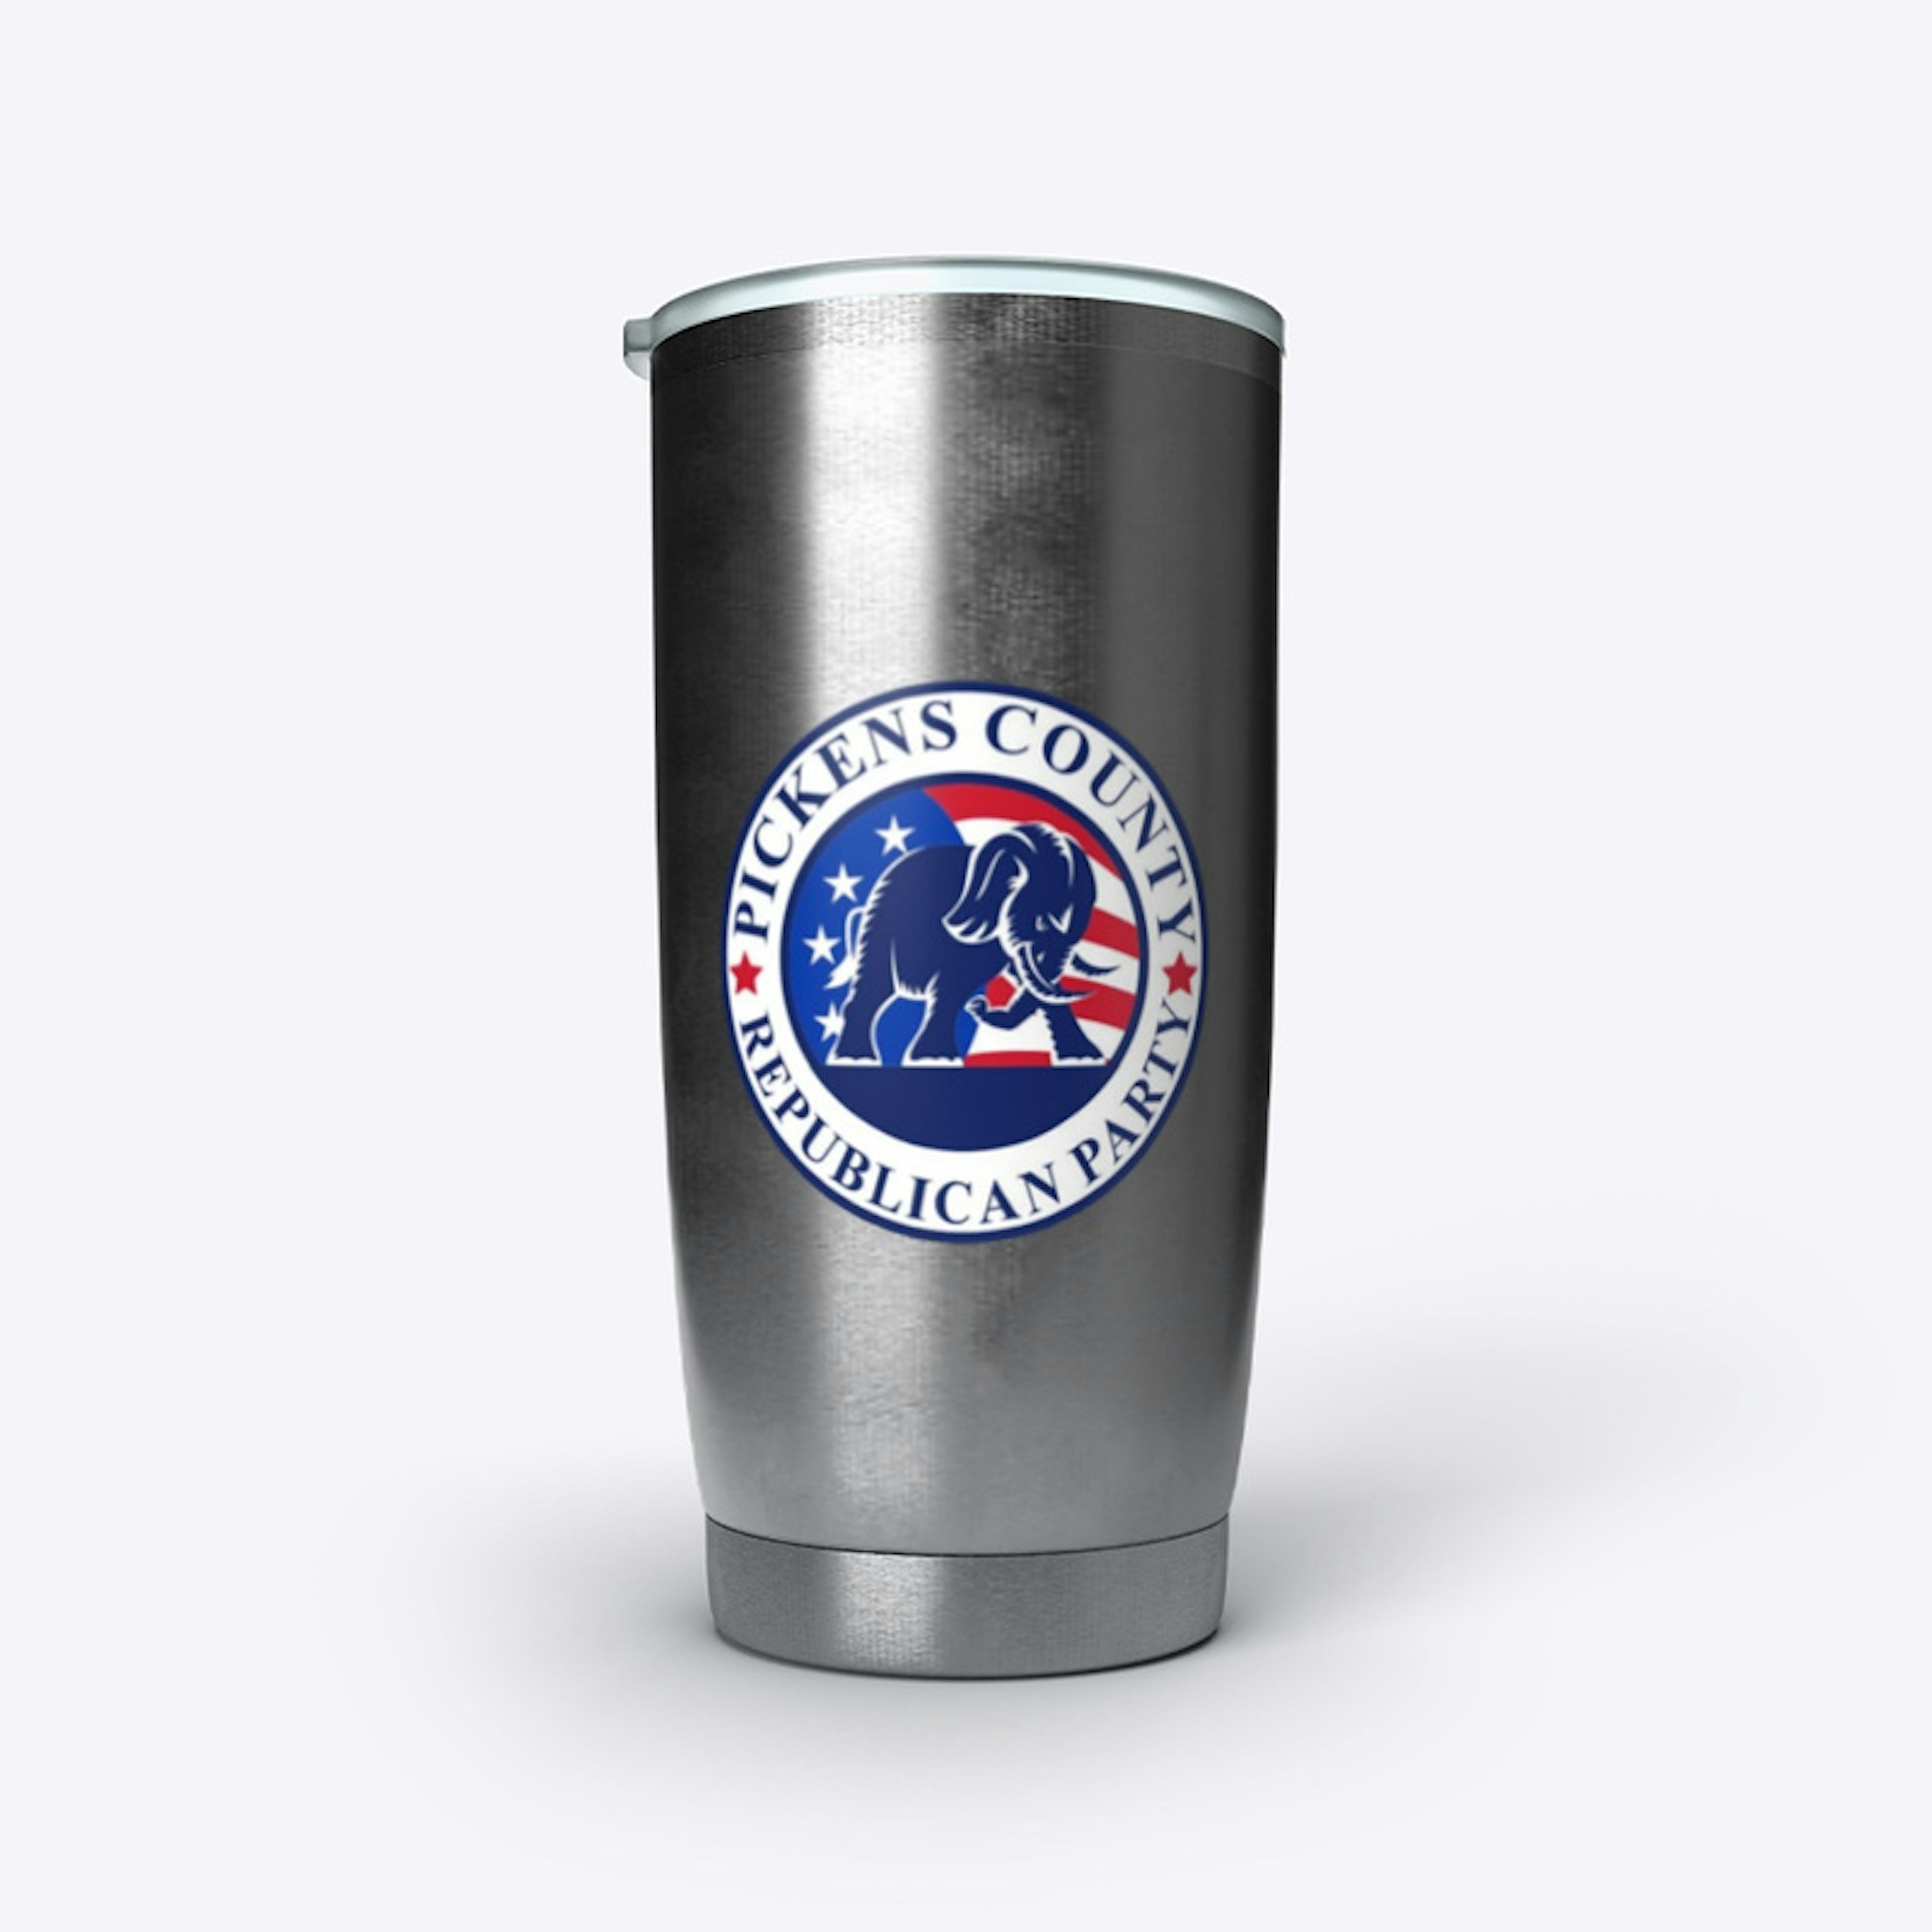 Pickens County GOP Tumbler Cup